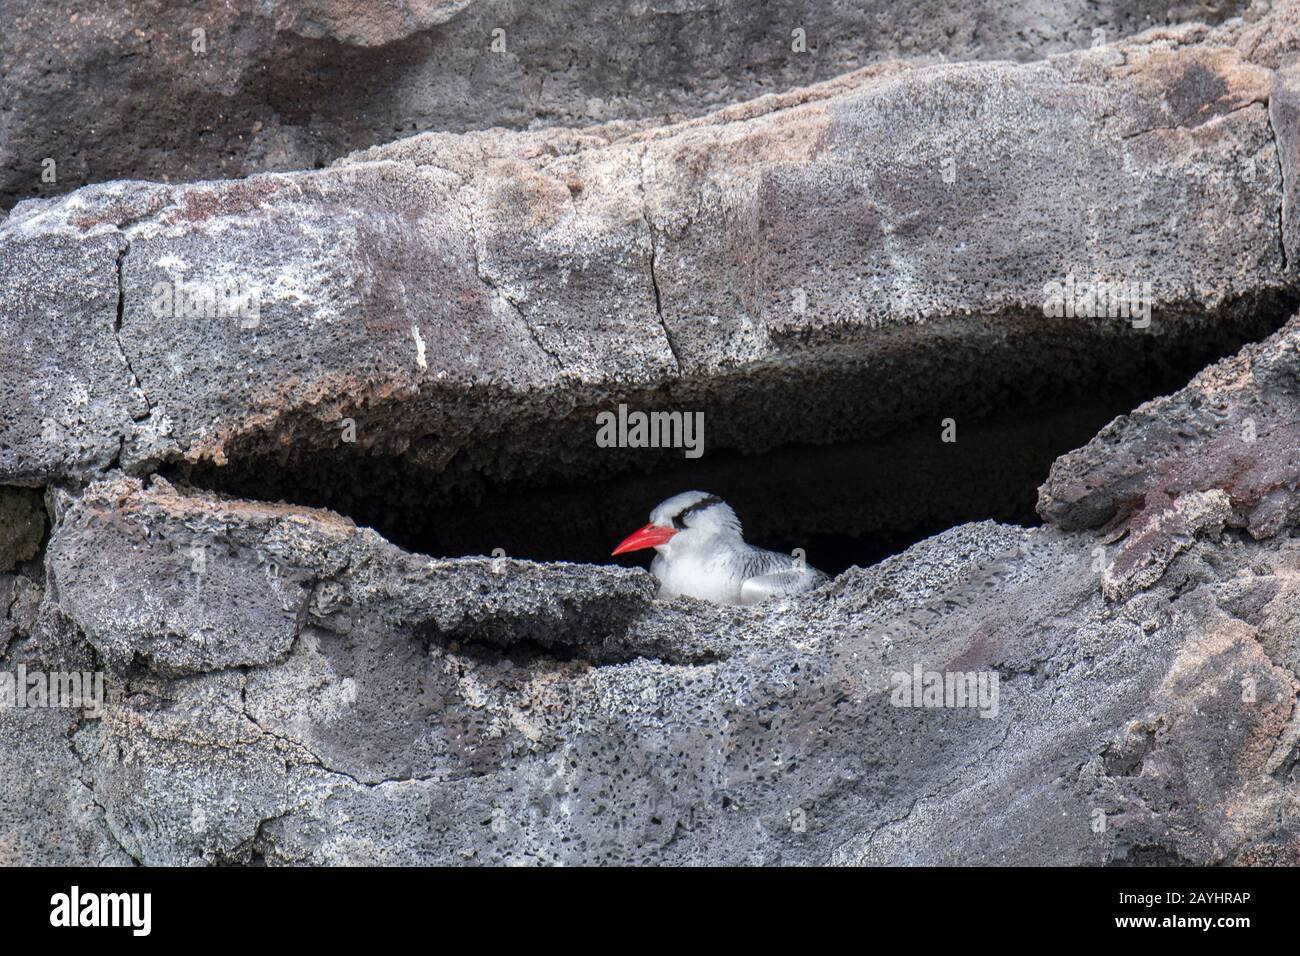 A Red-billed tropicbird (Phaethon aethereus mesonauta) is nesting in a cliff on Genovesa Island (Tower Island) in the Galapagos Islands, Ecuador. Stock Photo